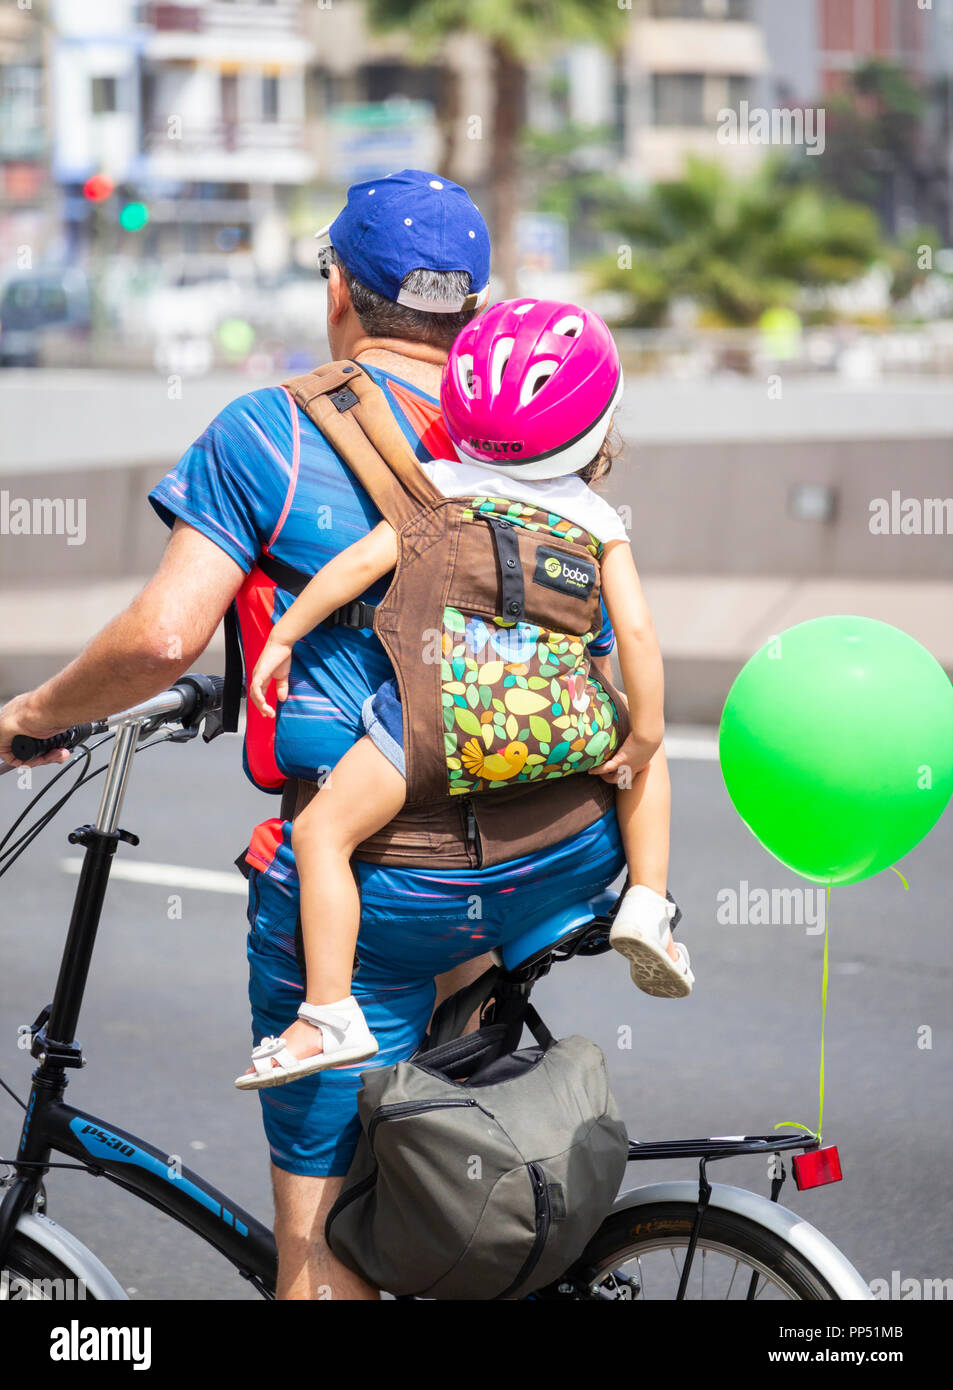 Cyclist carrying child on back. Stock Photo